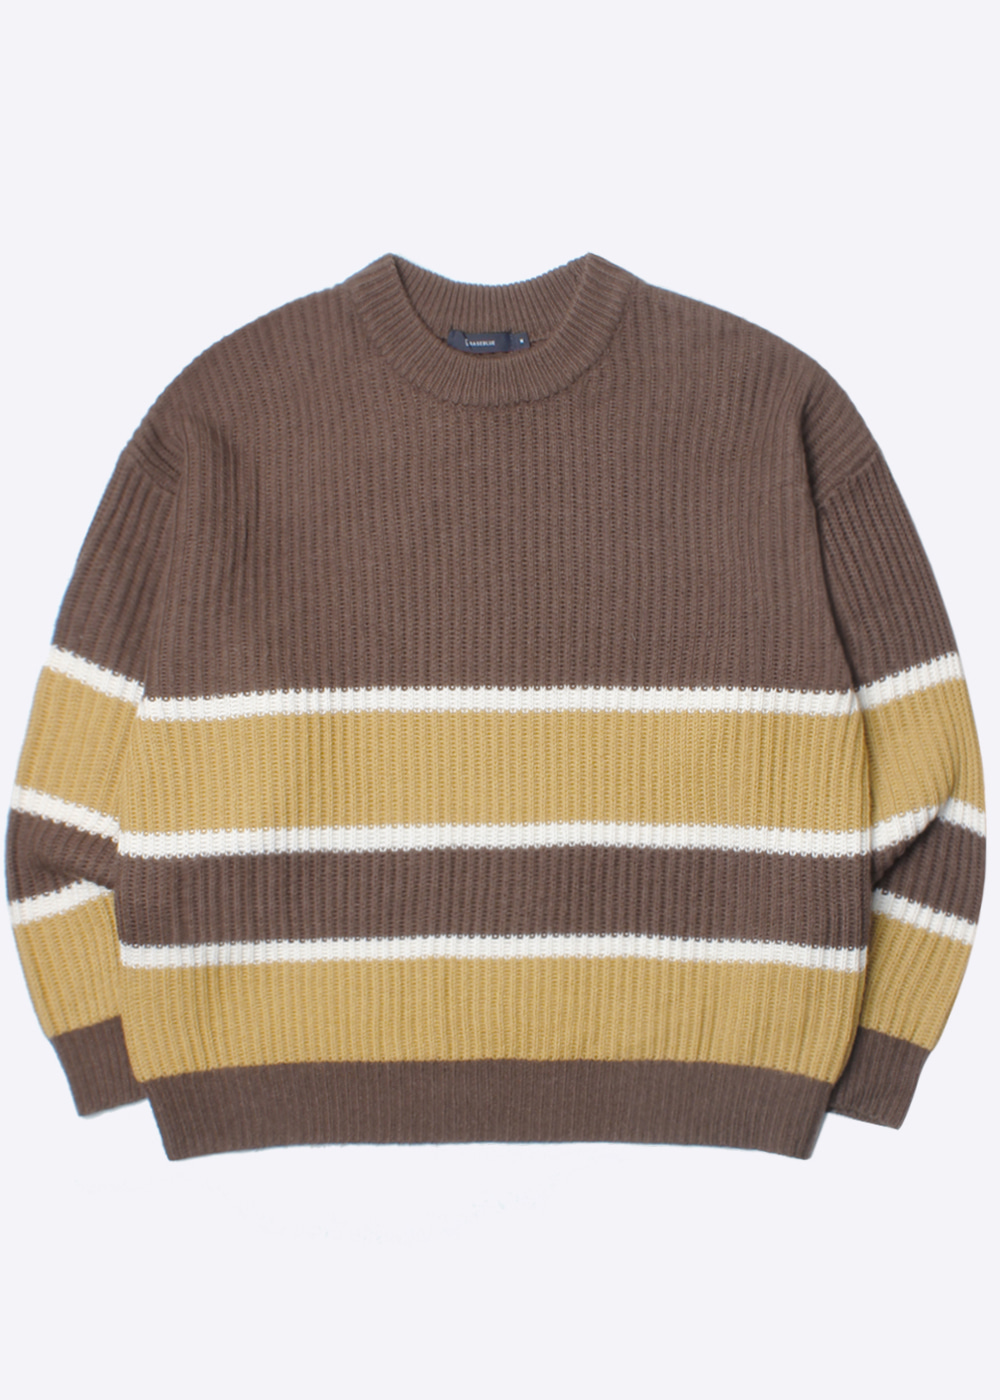 RAGEBLUE’over fit’wool knit sweater